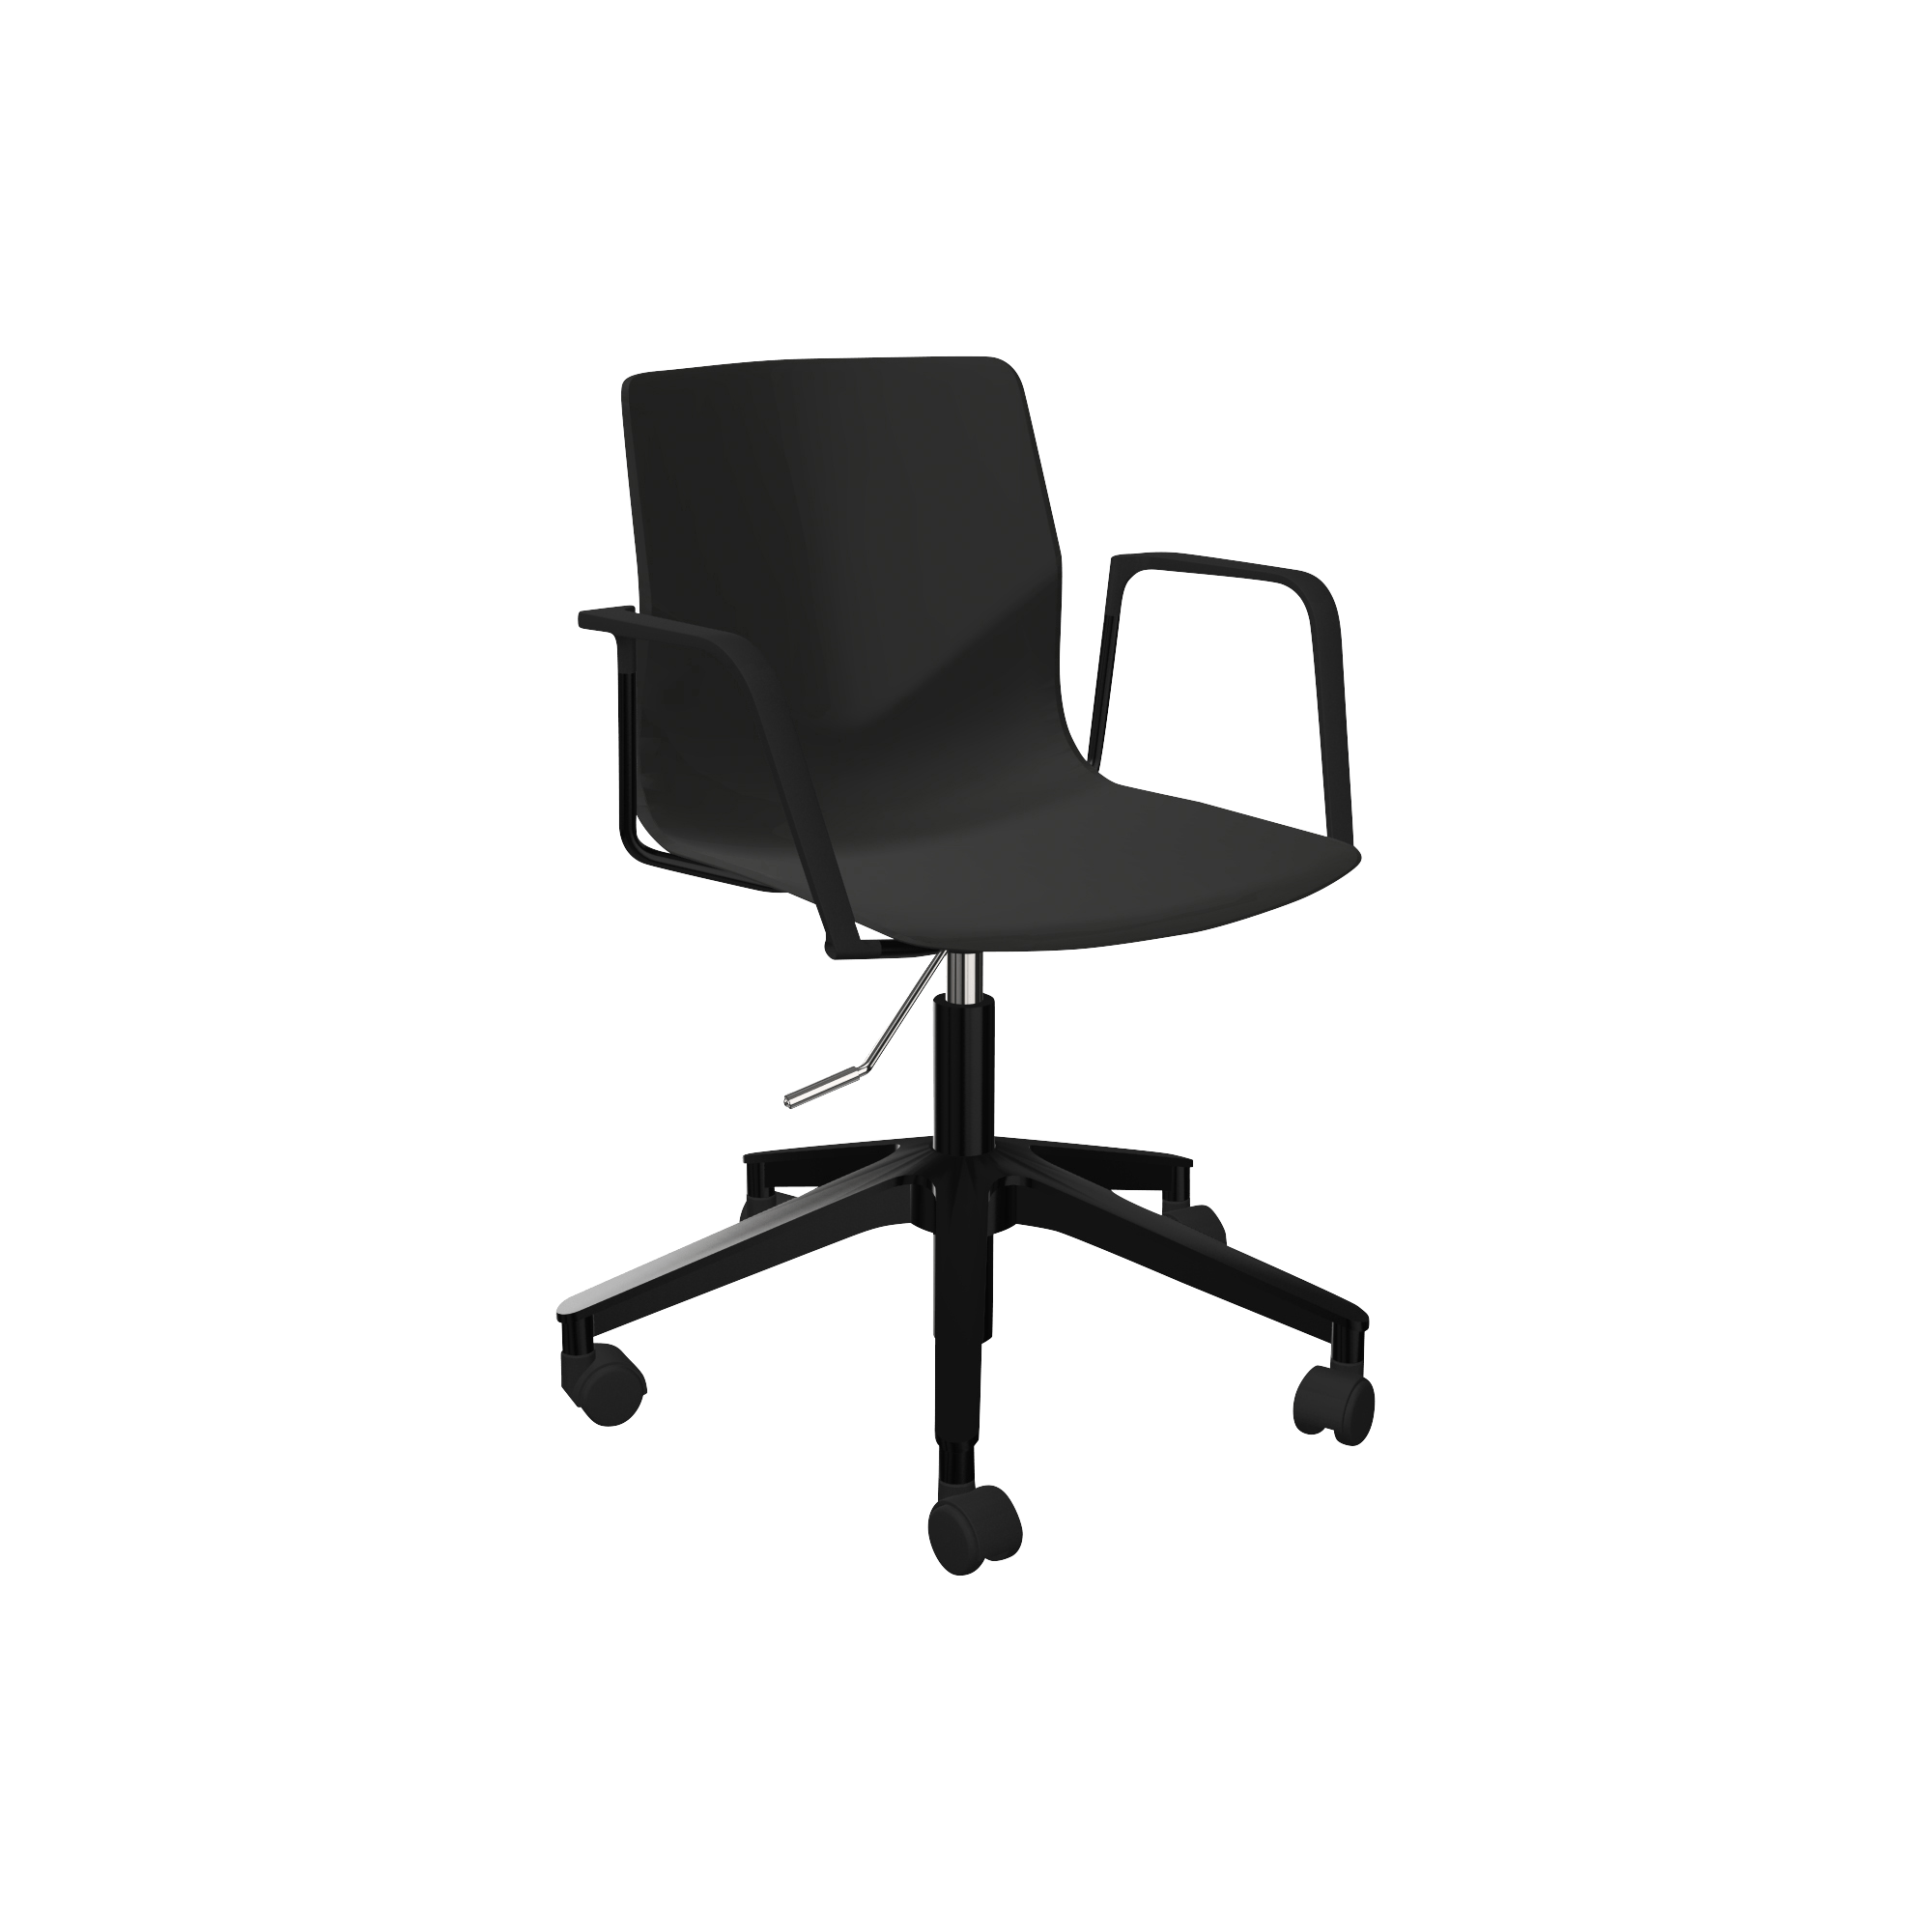 Black adjustable height office chair with wheels and arm rests